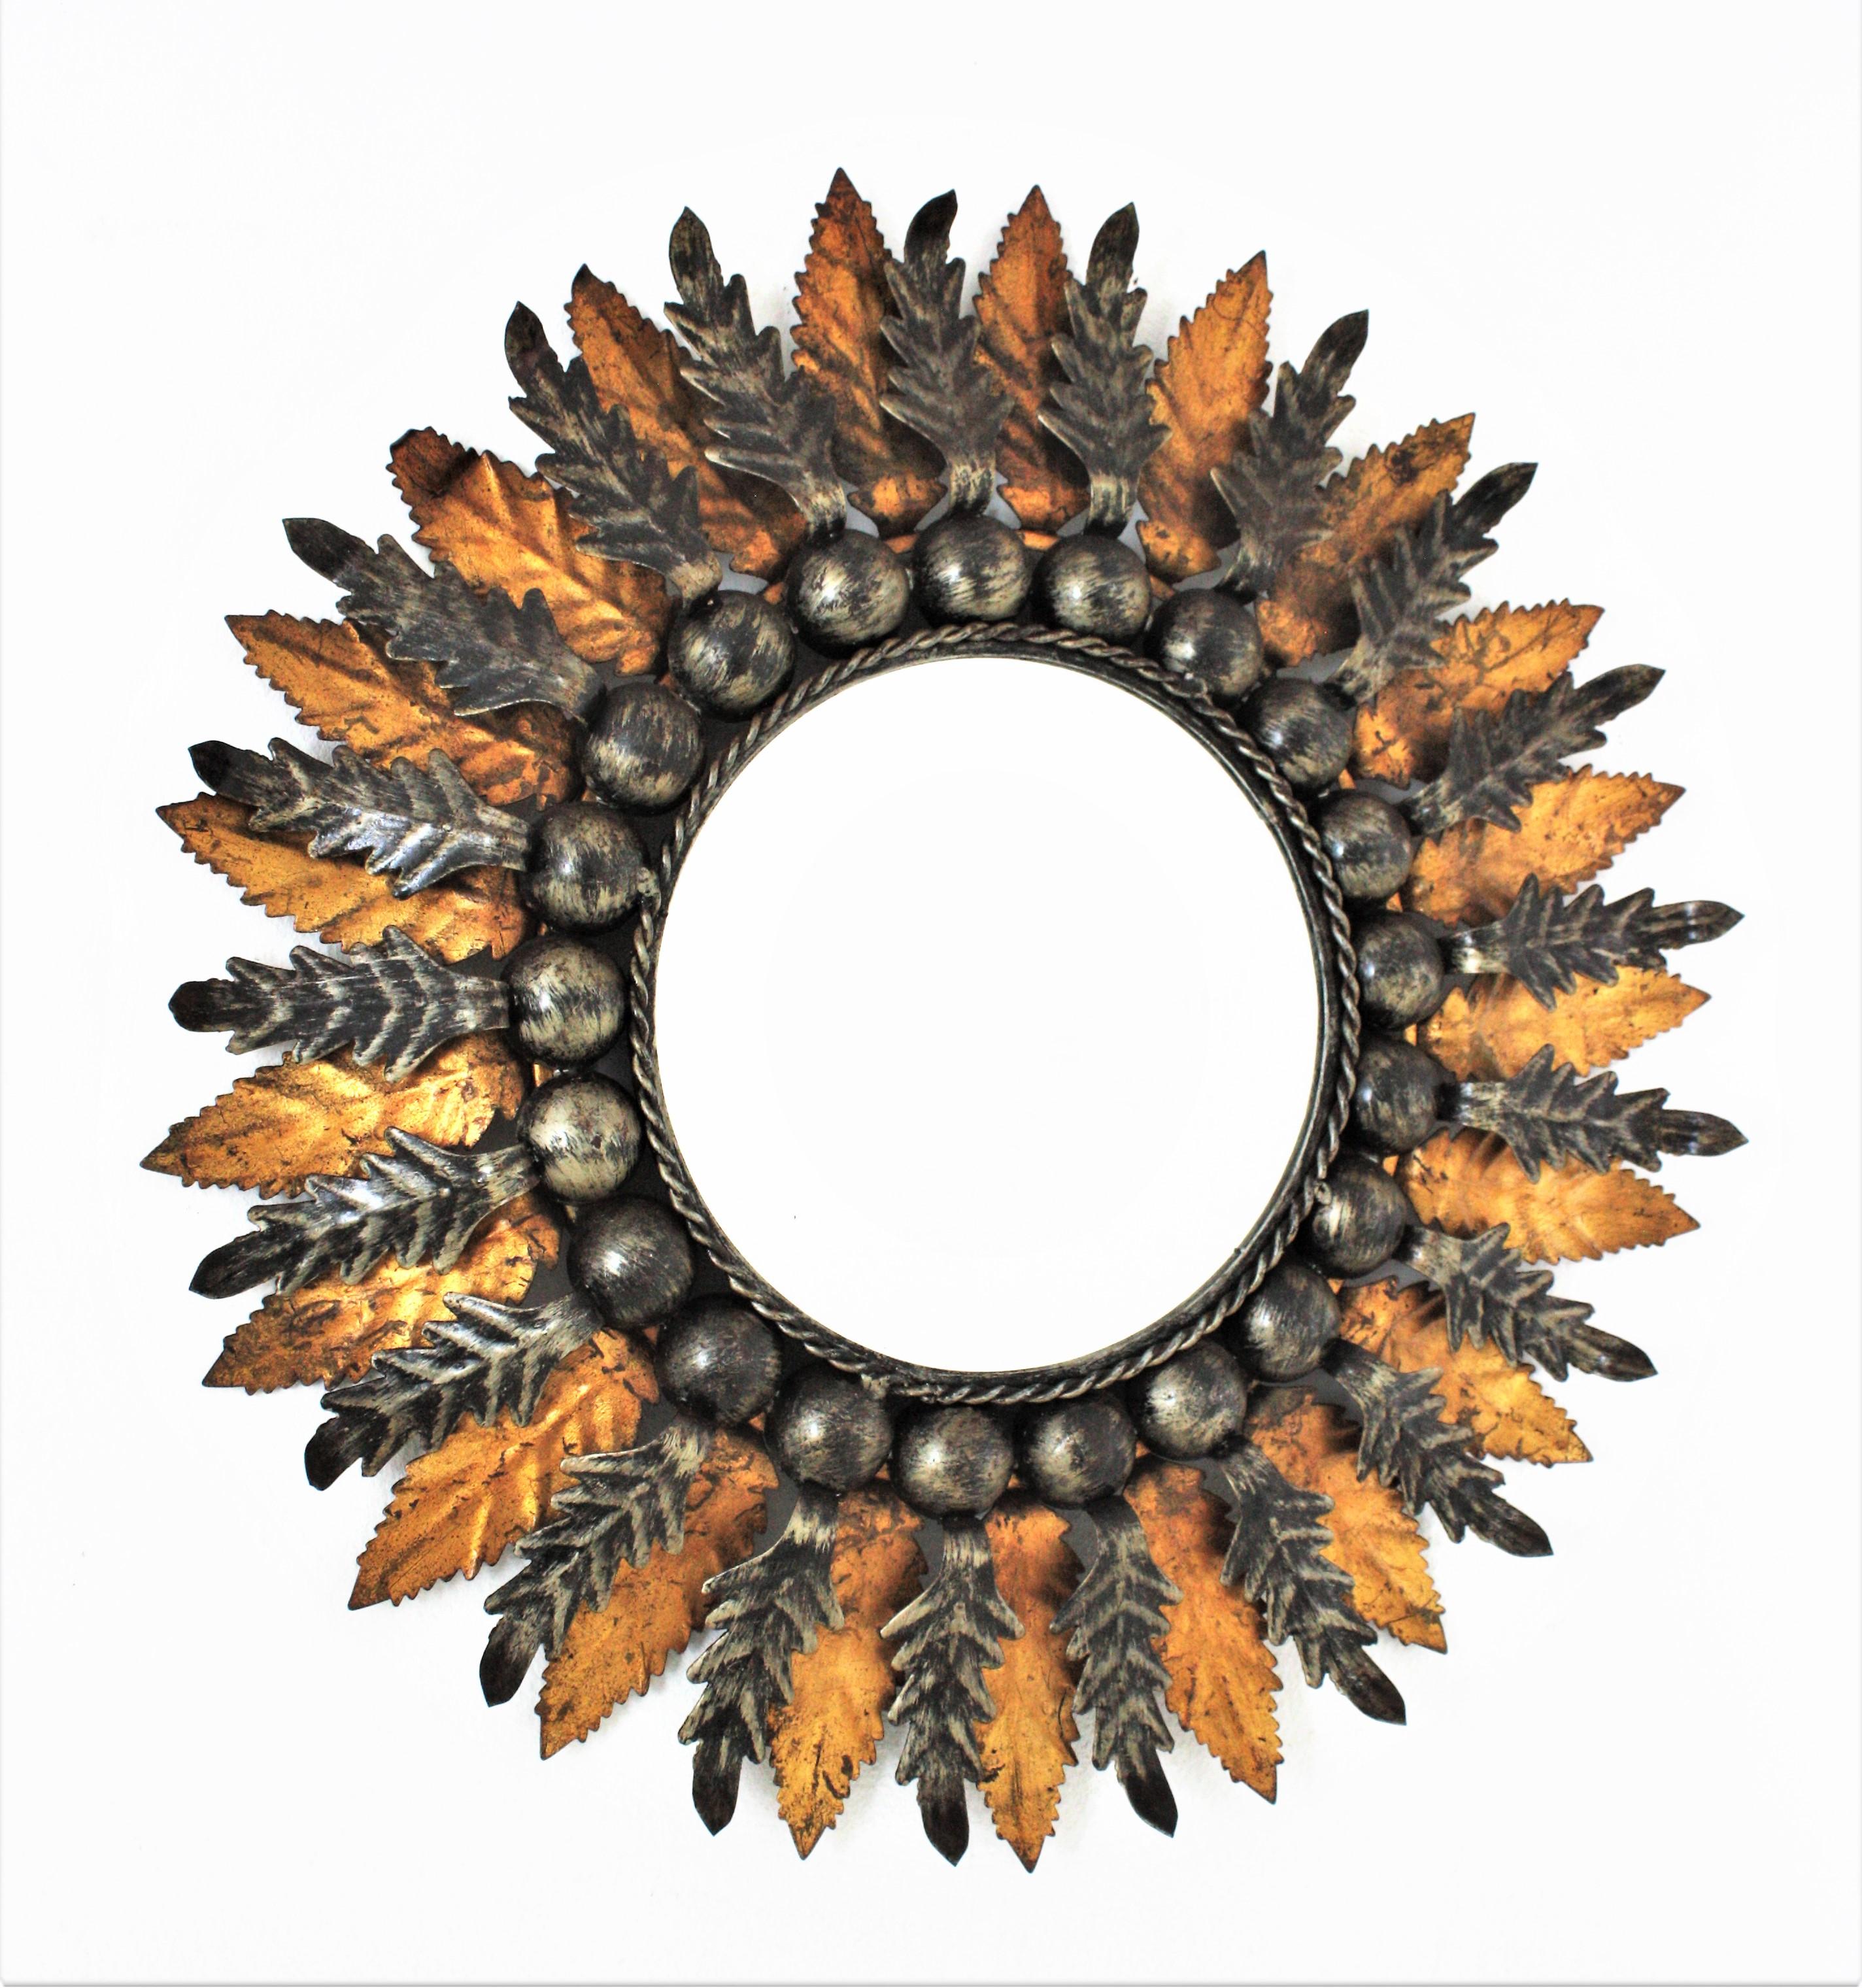 Double layered Foliage Two tone sunburst mirror, patinated metal, gilt metal, Spain, 1960s.
One of a kind gilt and silvered sunburst mirror with ball accents. This eye-catching sunburst mirror features a double layered leafed frame. A layer of gold